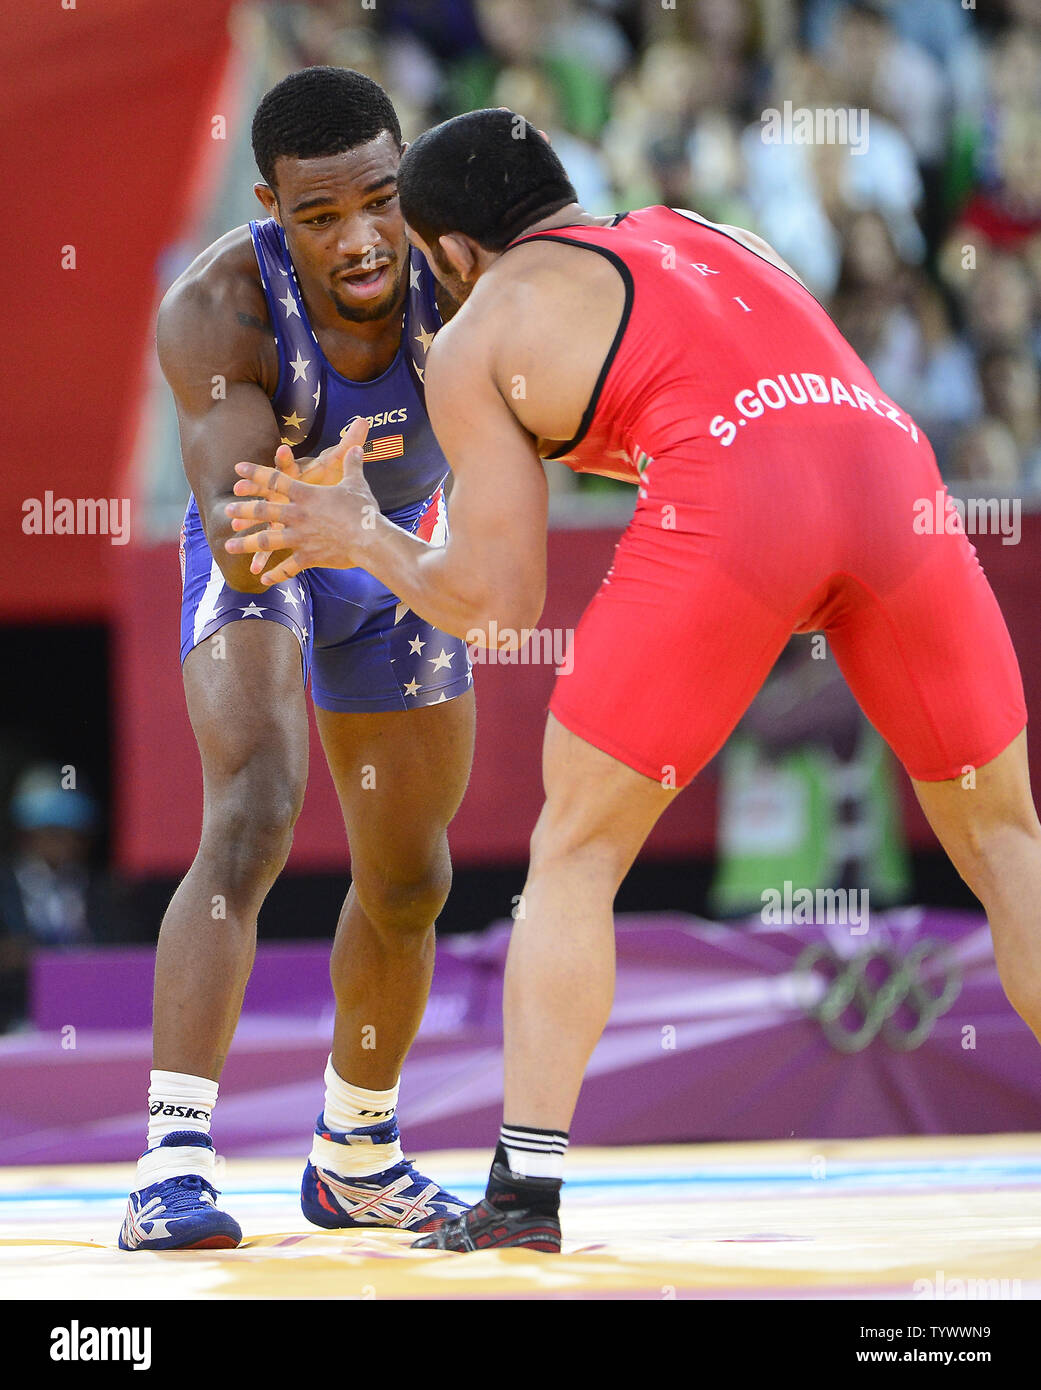 Jordan Ernest Burroughs of the United States of America, left, competes for a Gold Medal with Sadegh Saeed Goudarzi of Iran, right, in the Men's 74kg Freestyle Wrestling at the London 2012 Summer Olympics on August 10, 2012 in London. Burroughs won the match and the Gold.   UPI/Ron Sachs Stock Photo